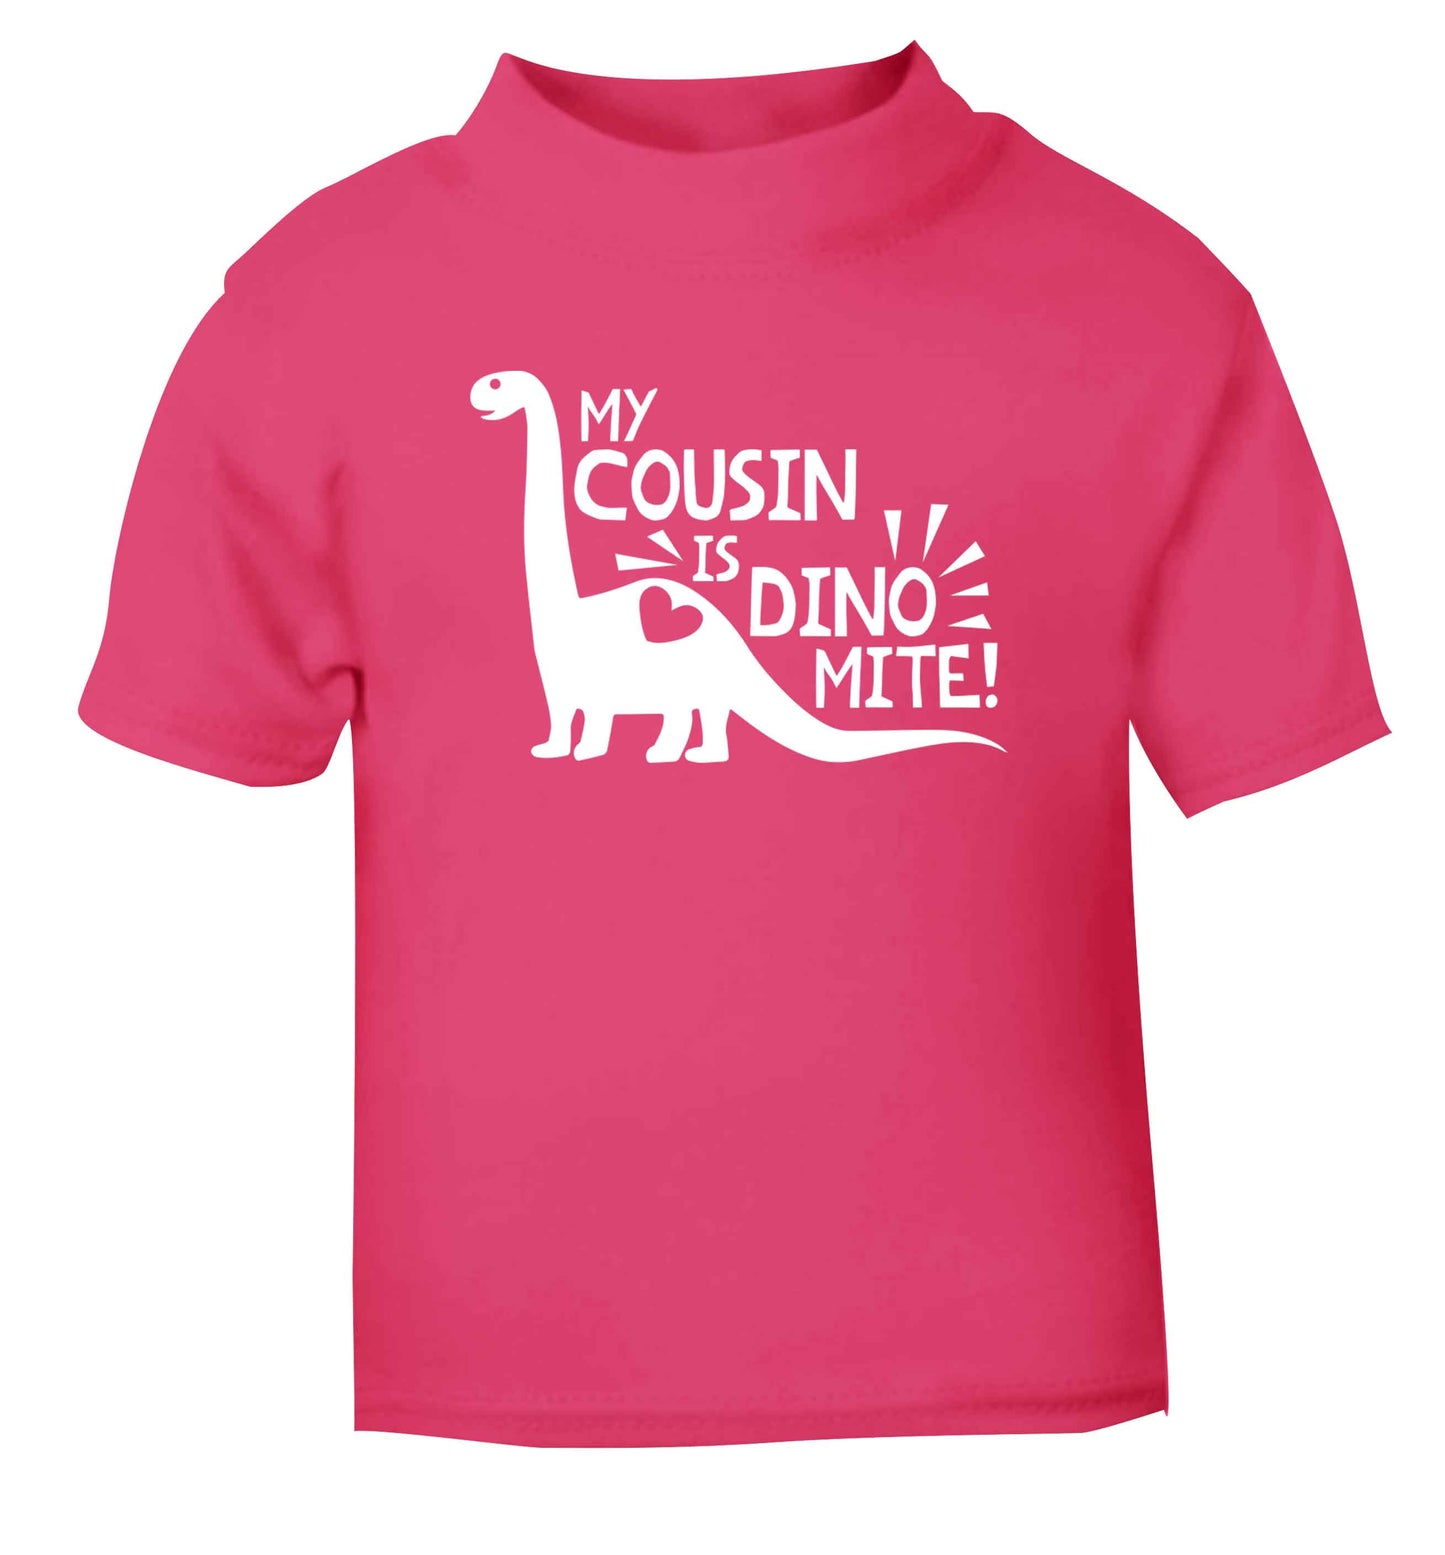 My cousin is dinomite! pink Baby Toddler Tshirt 2 Years